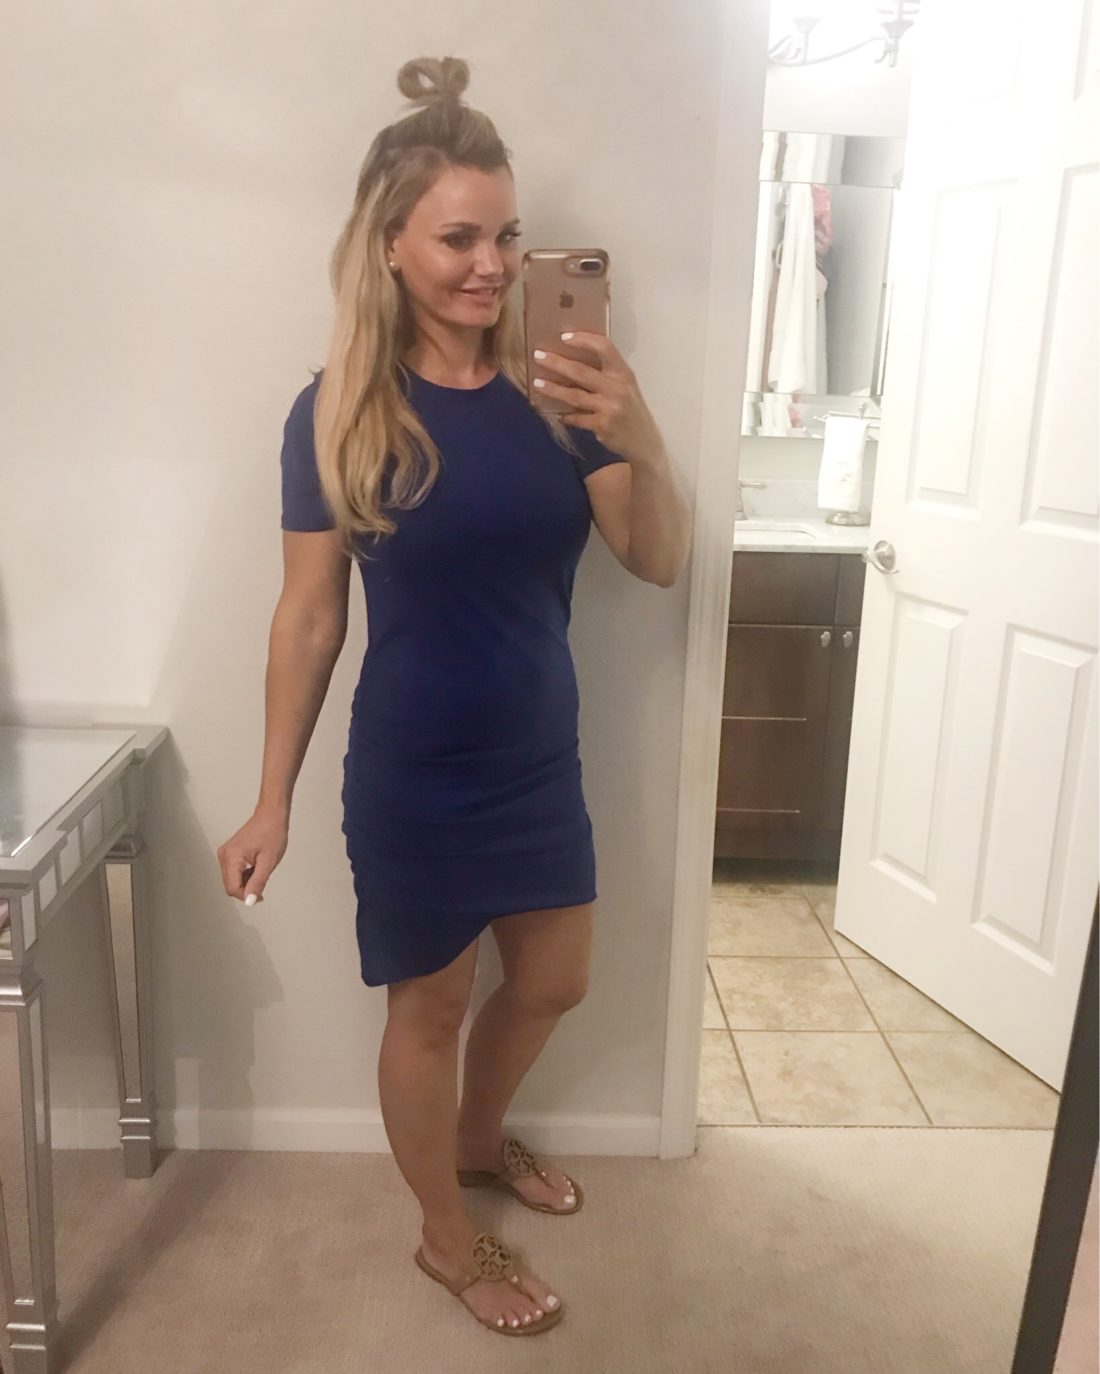 Blue Summer Dress - 4th of July Outfit